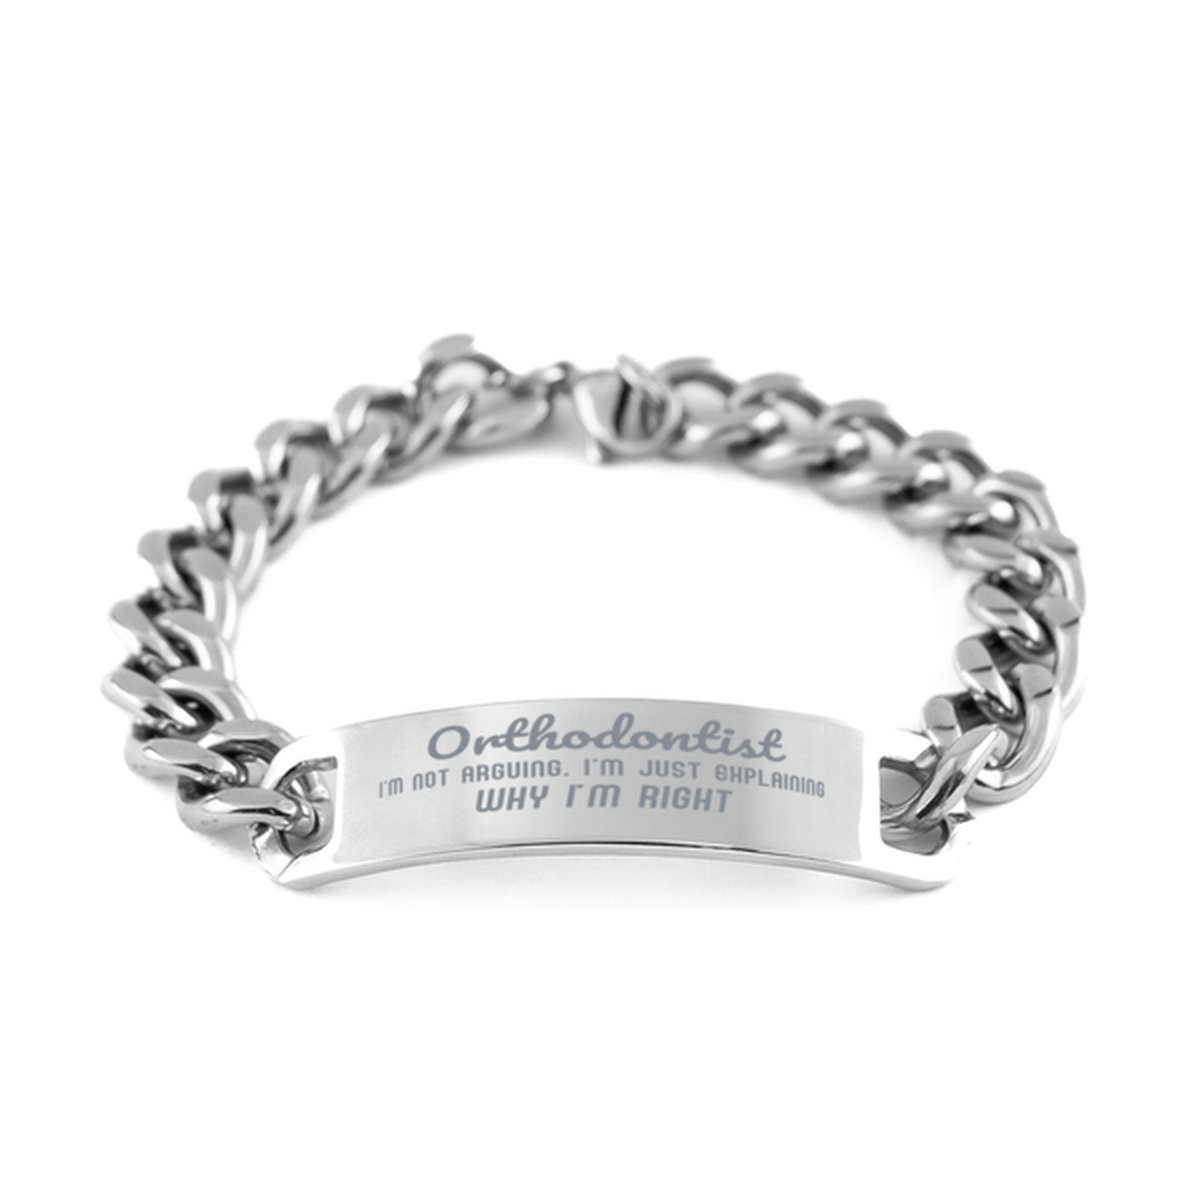 Orthodontist I'm not Arguing. I'm Just Explaining Why I'm RIGHT Cuban Chain Stainless Steel Bracelet, Graduation Birthday Christmas Orthodontist Gifts For Orthodontist Funny Saying Quote Present for Men Women Coworker